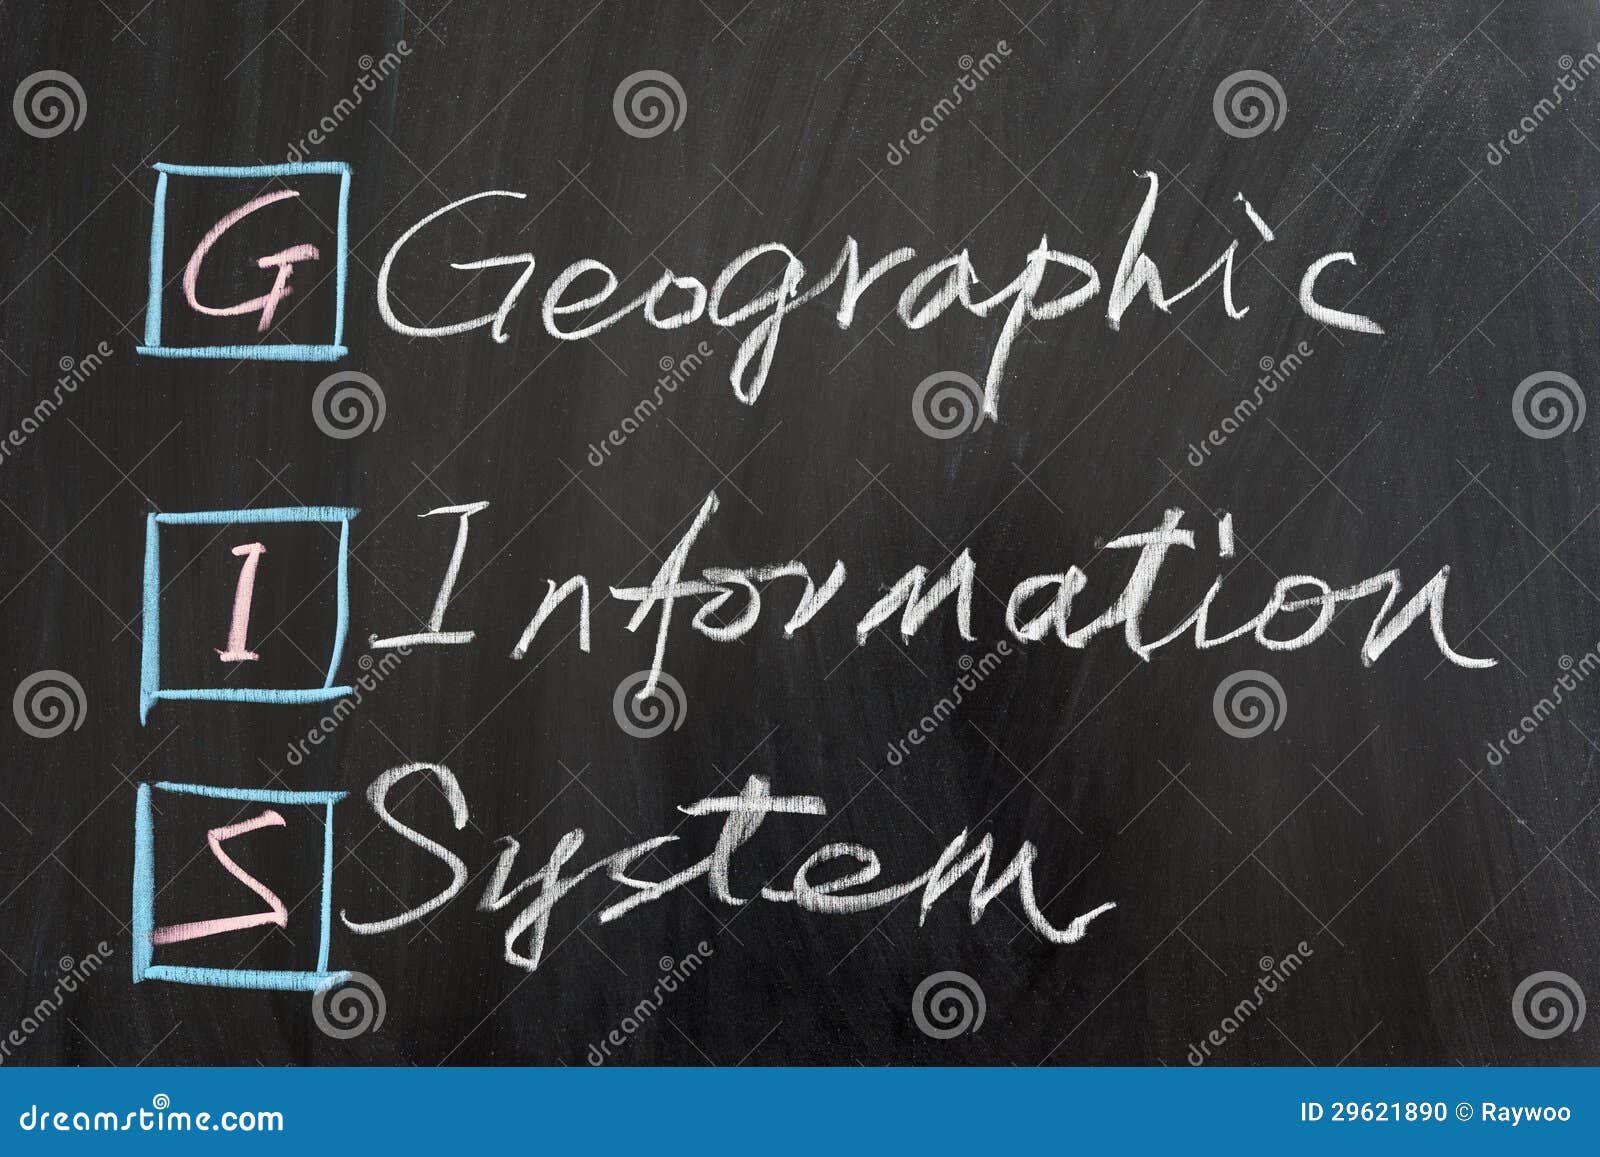 gis, geographic information system